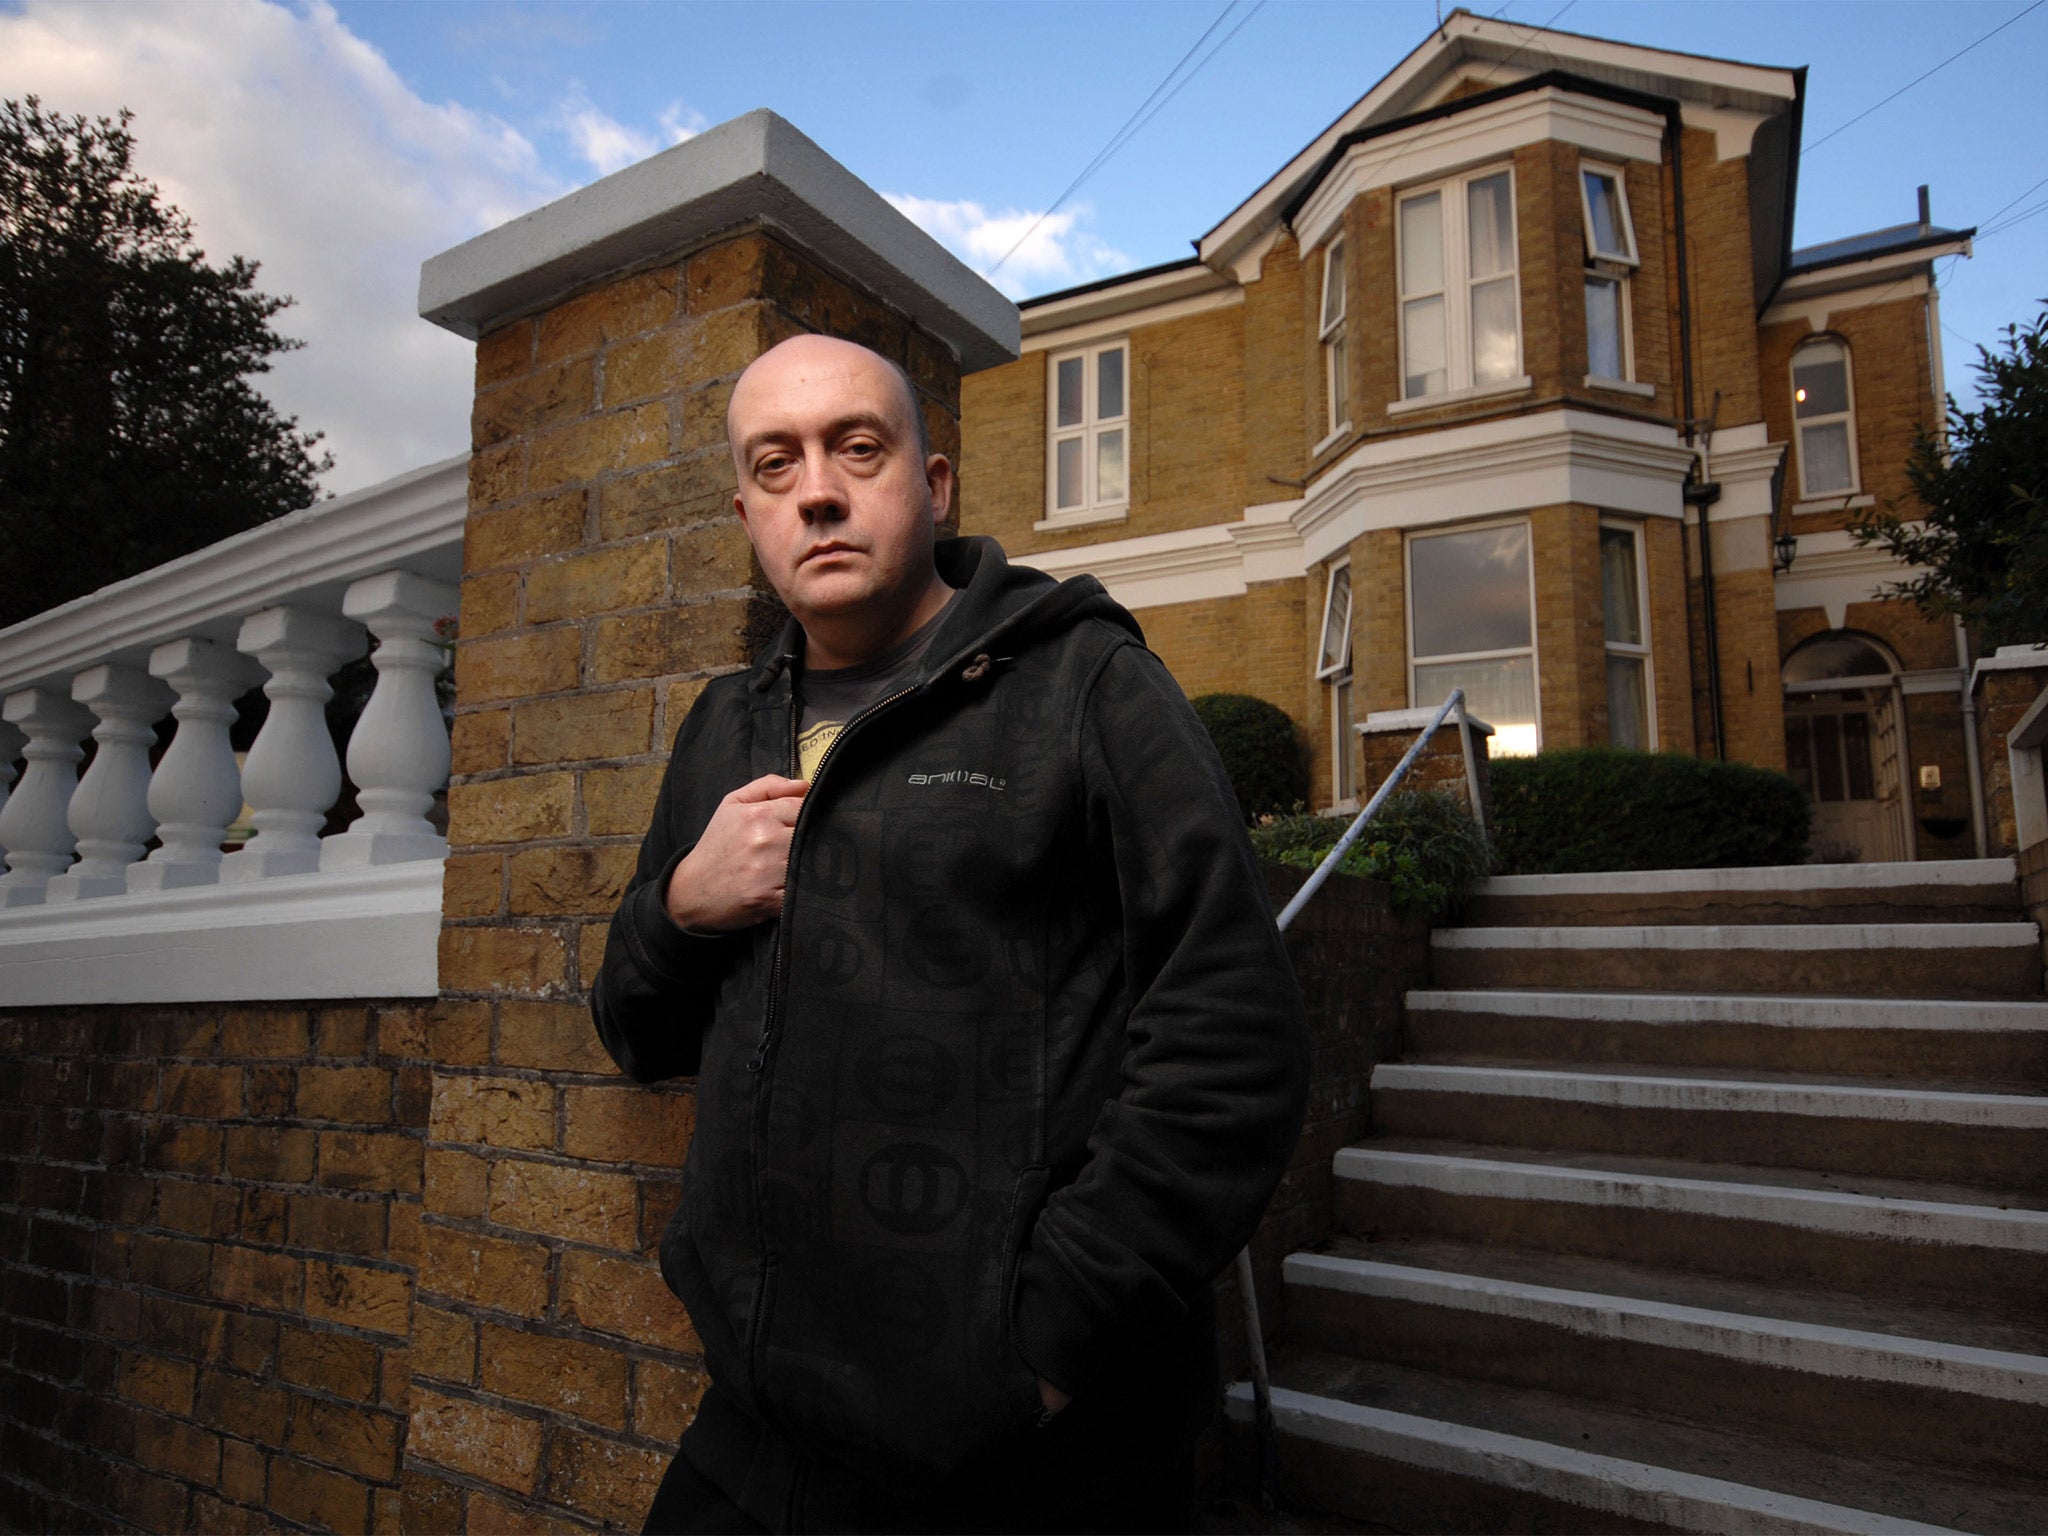 Simon Cooke outside Waxham House care home on the Isle of Wight, where staff left his mother sitting in her own waste for hours and failed to treat bedsores which turned septic